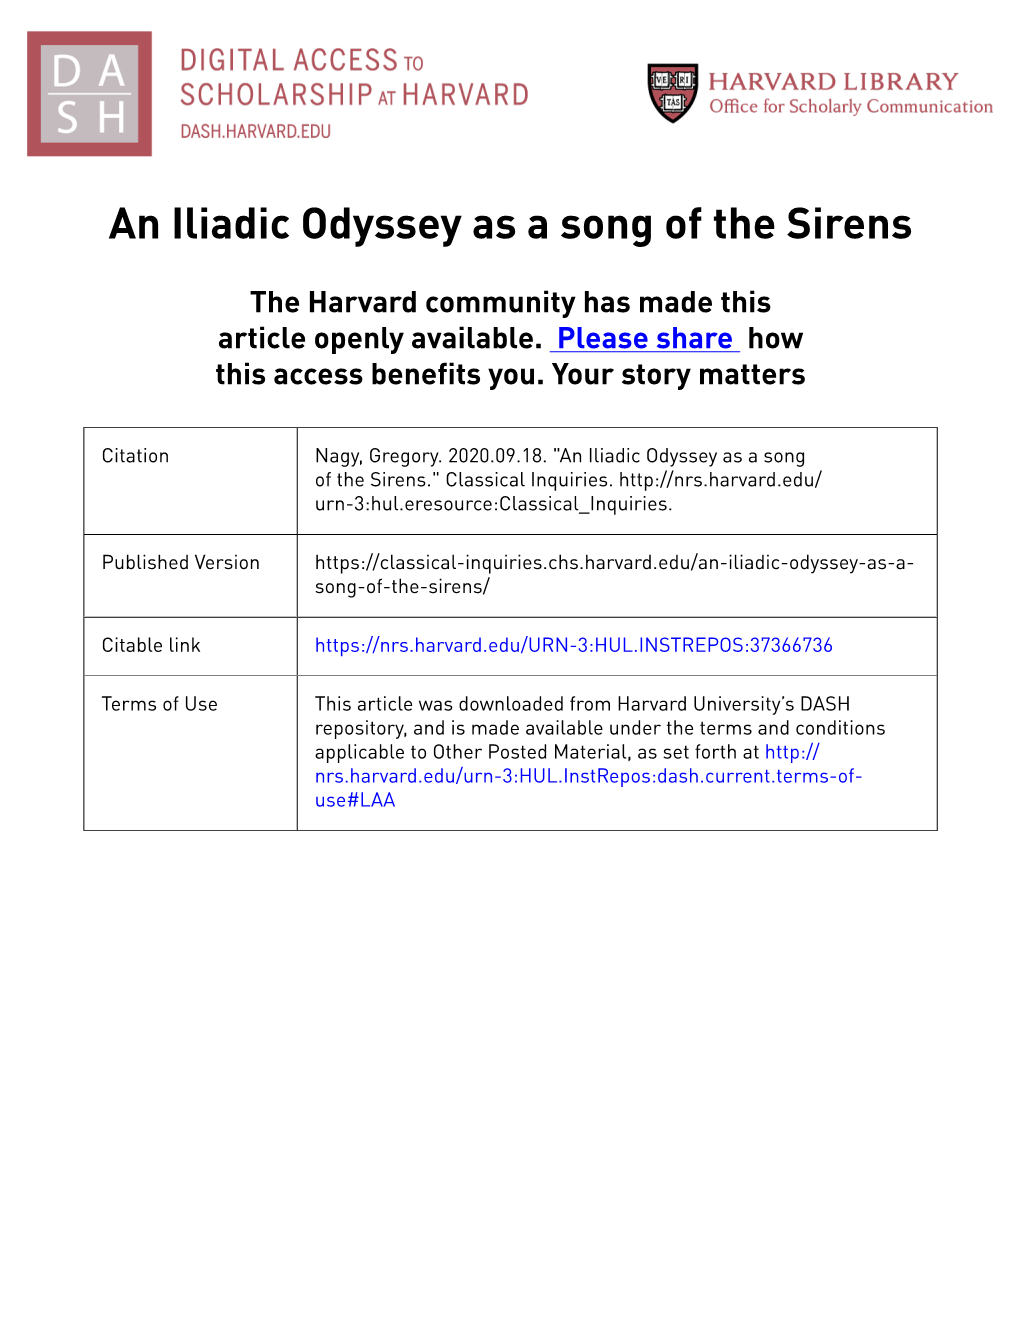 An Iliadic Odyssey As a Song of the Sirens